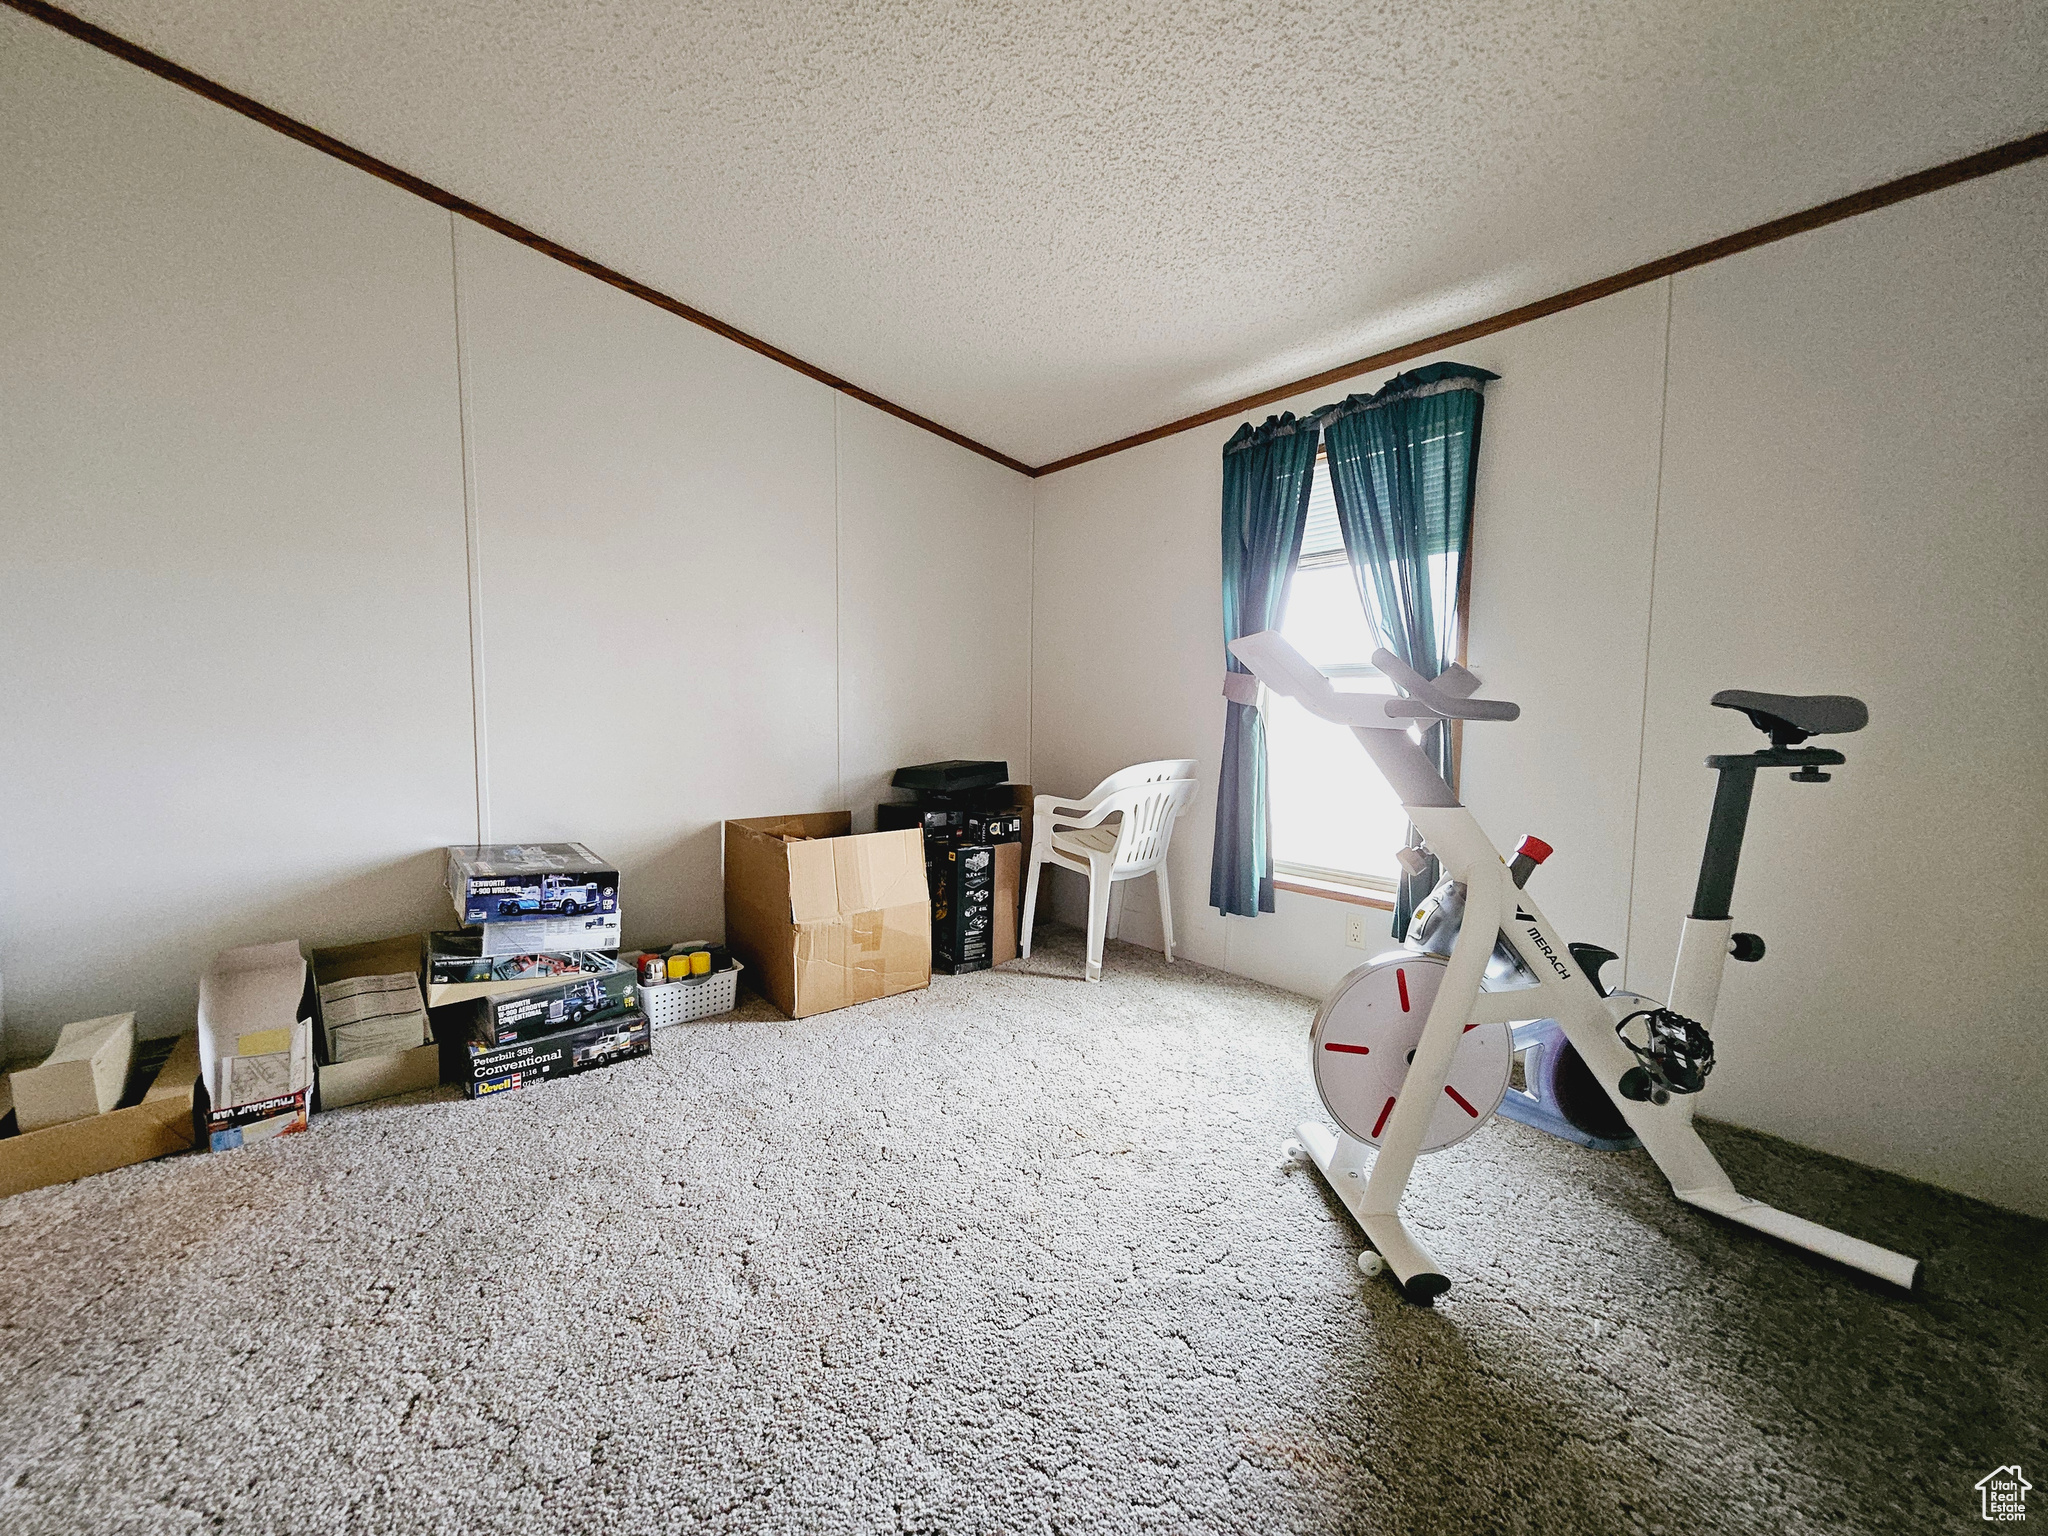 Exercise room with carpet flooring, a textured ceiling, and crown molding